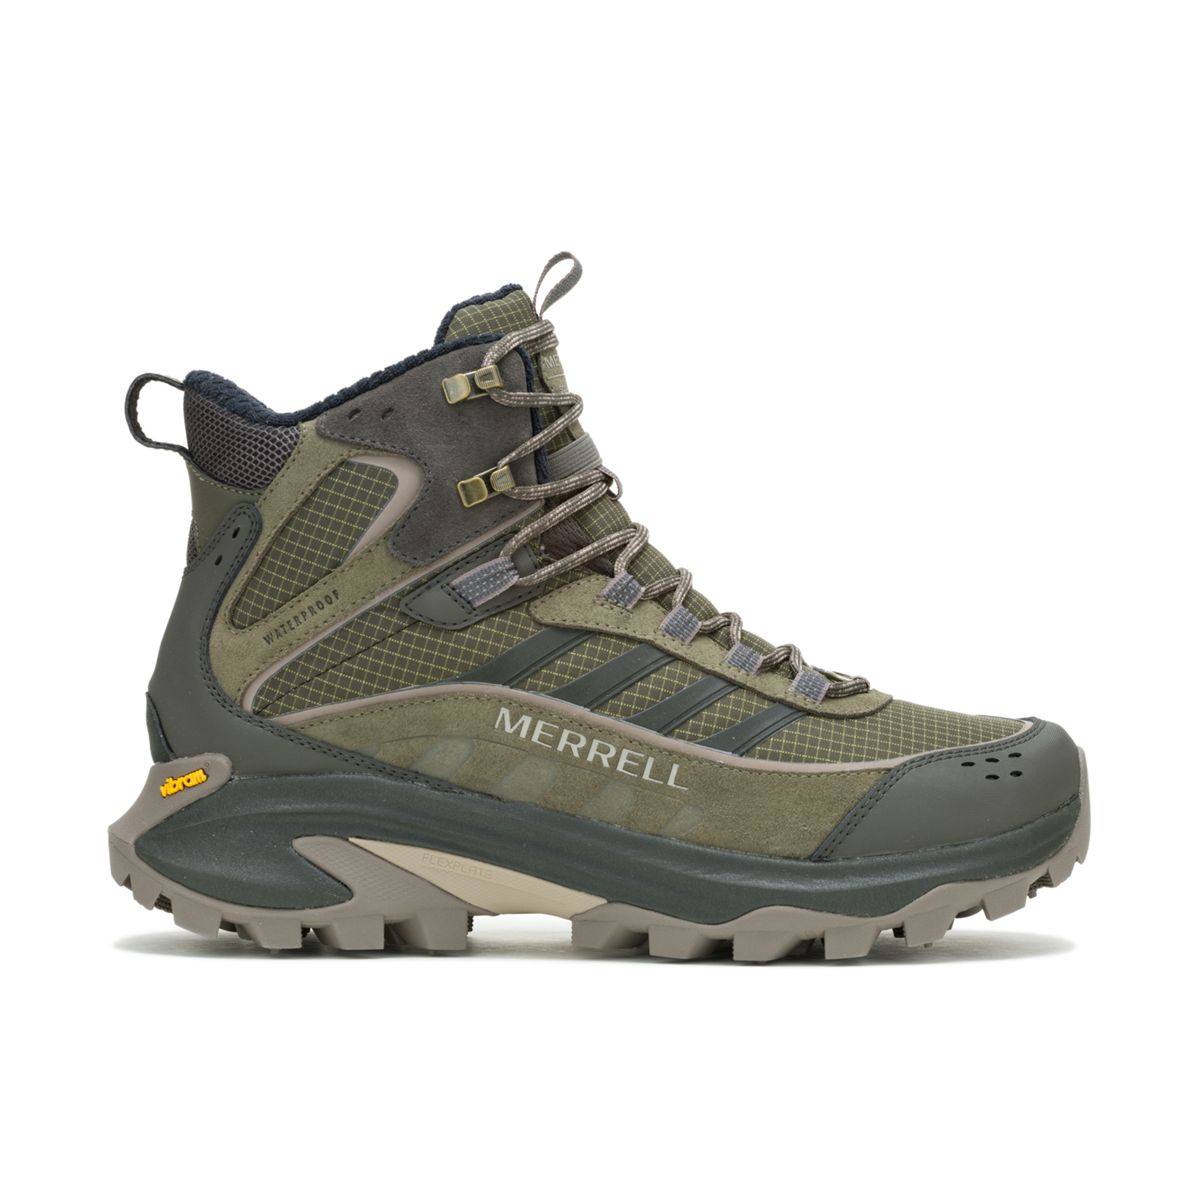 Moab Speed 2 Thermo Mid Waterproof, Olive, dynamic